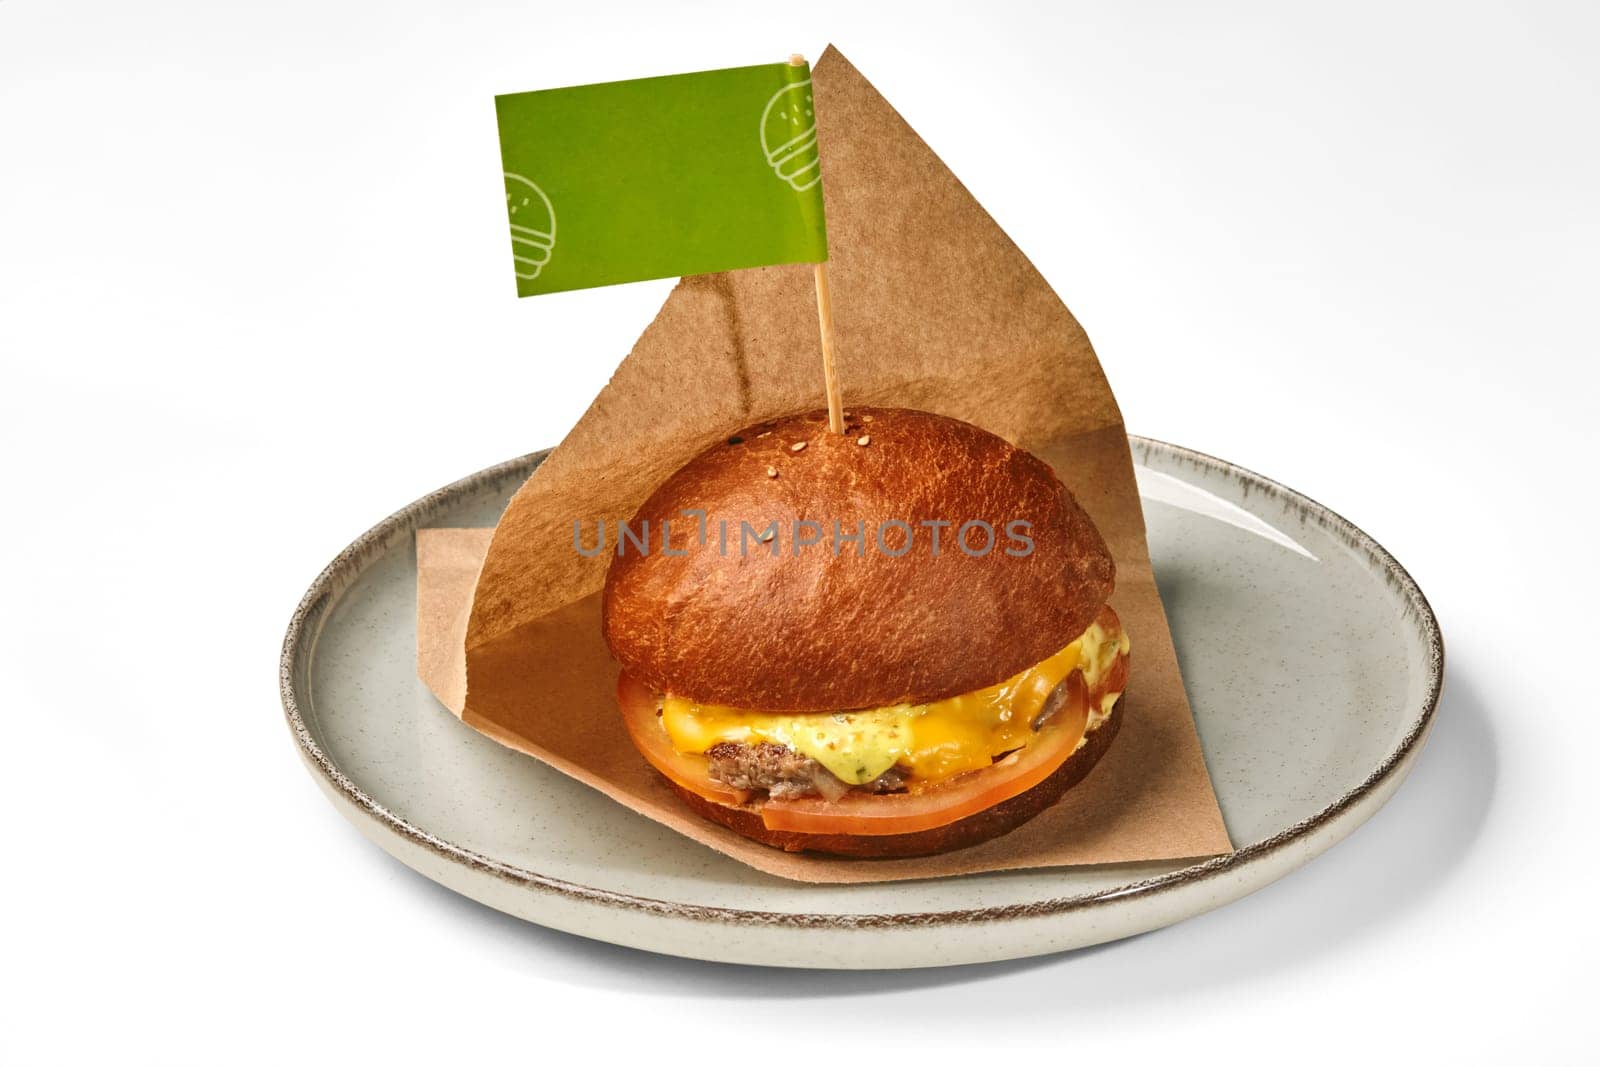 Appetizing hamburger in toasted fluffy bun with juicy beef patty, tomatoes and spicy cheese sauce, served in paper wrap with green flag label on plate against white background